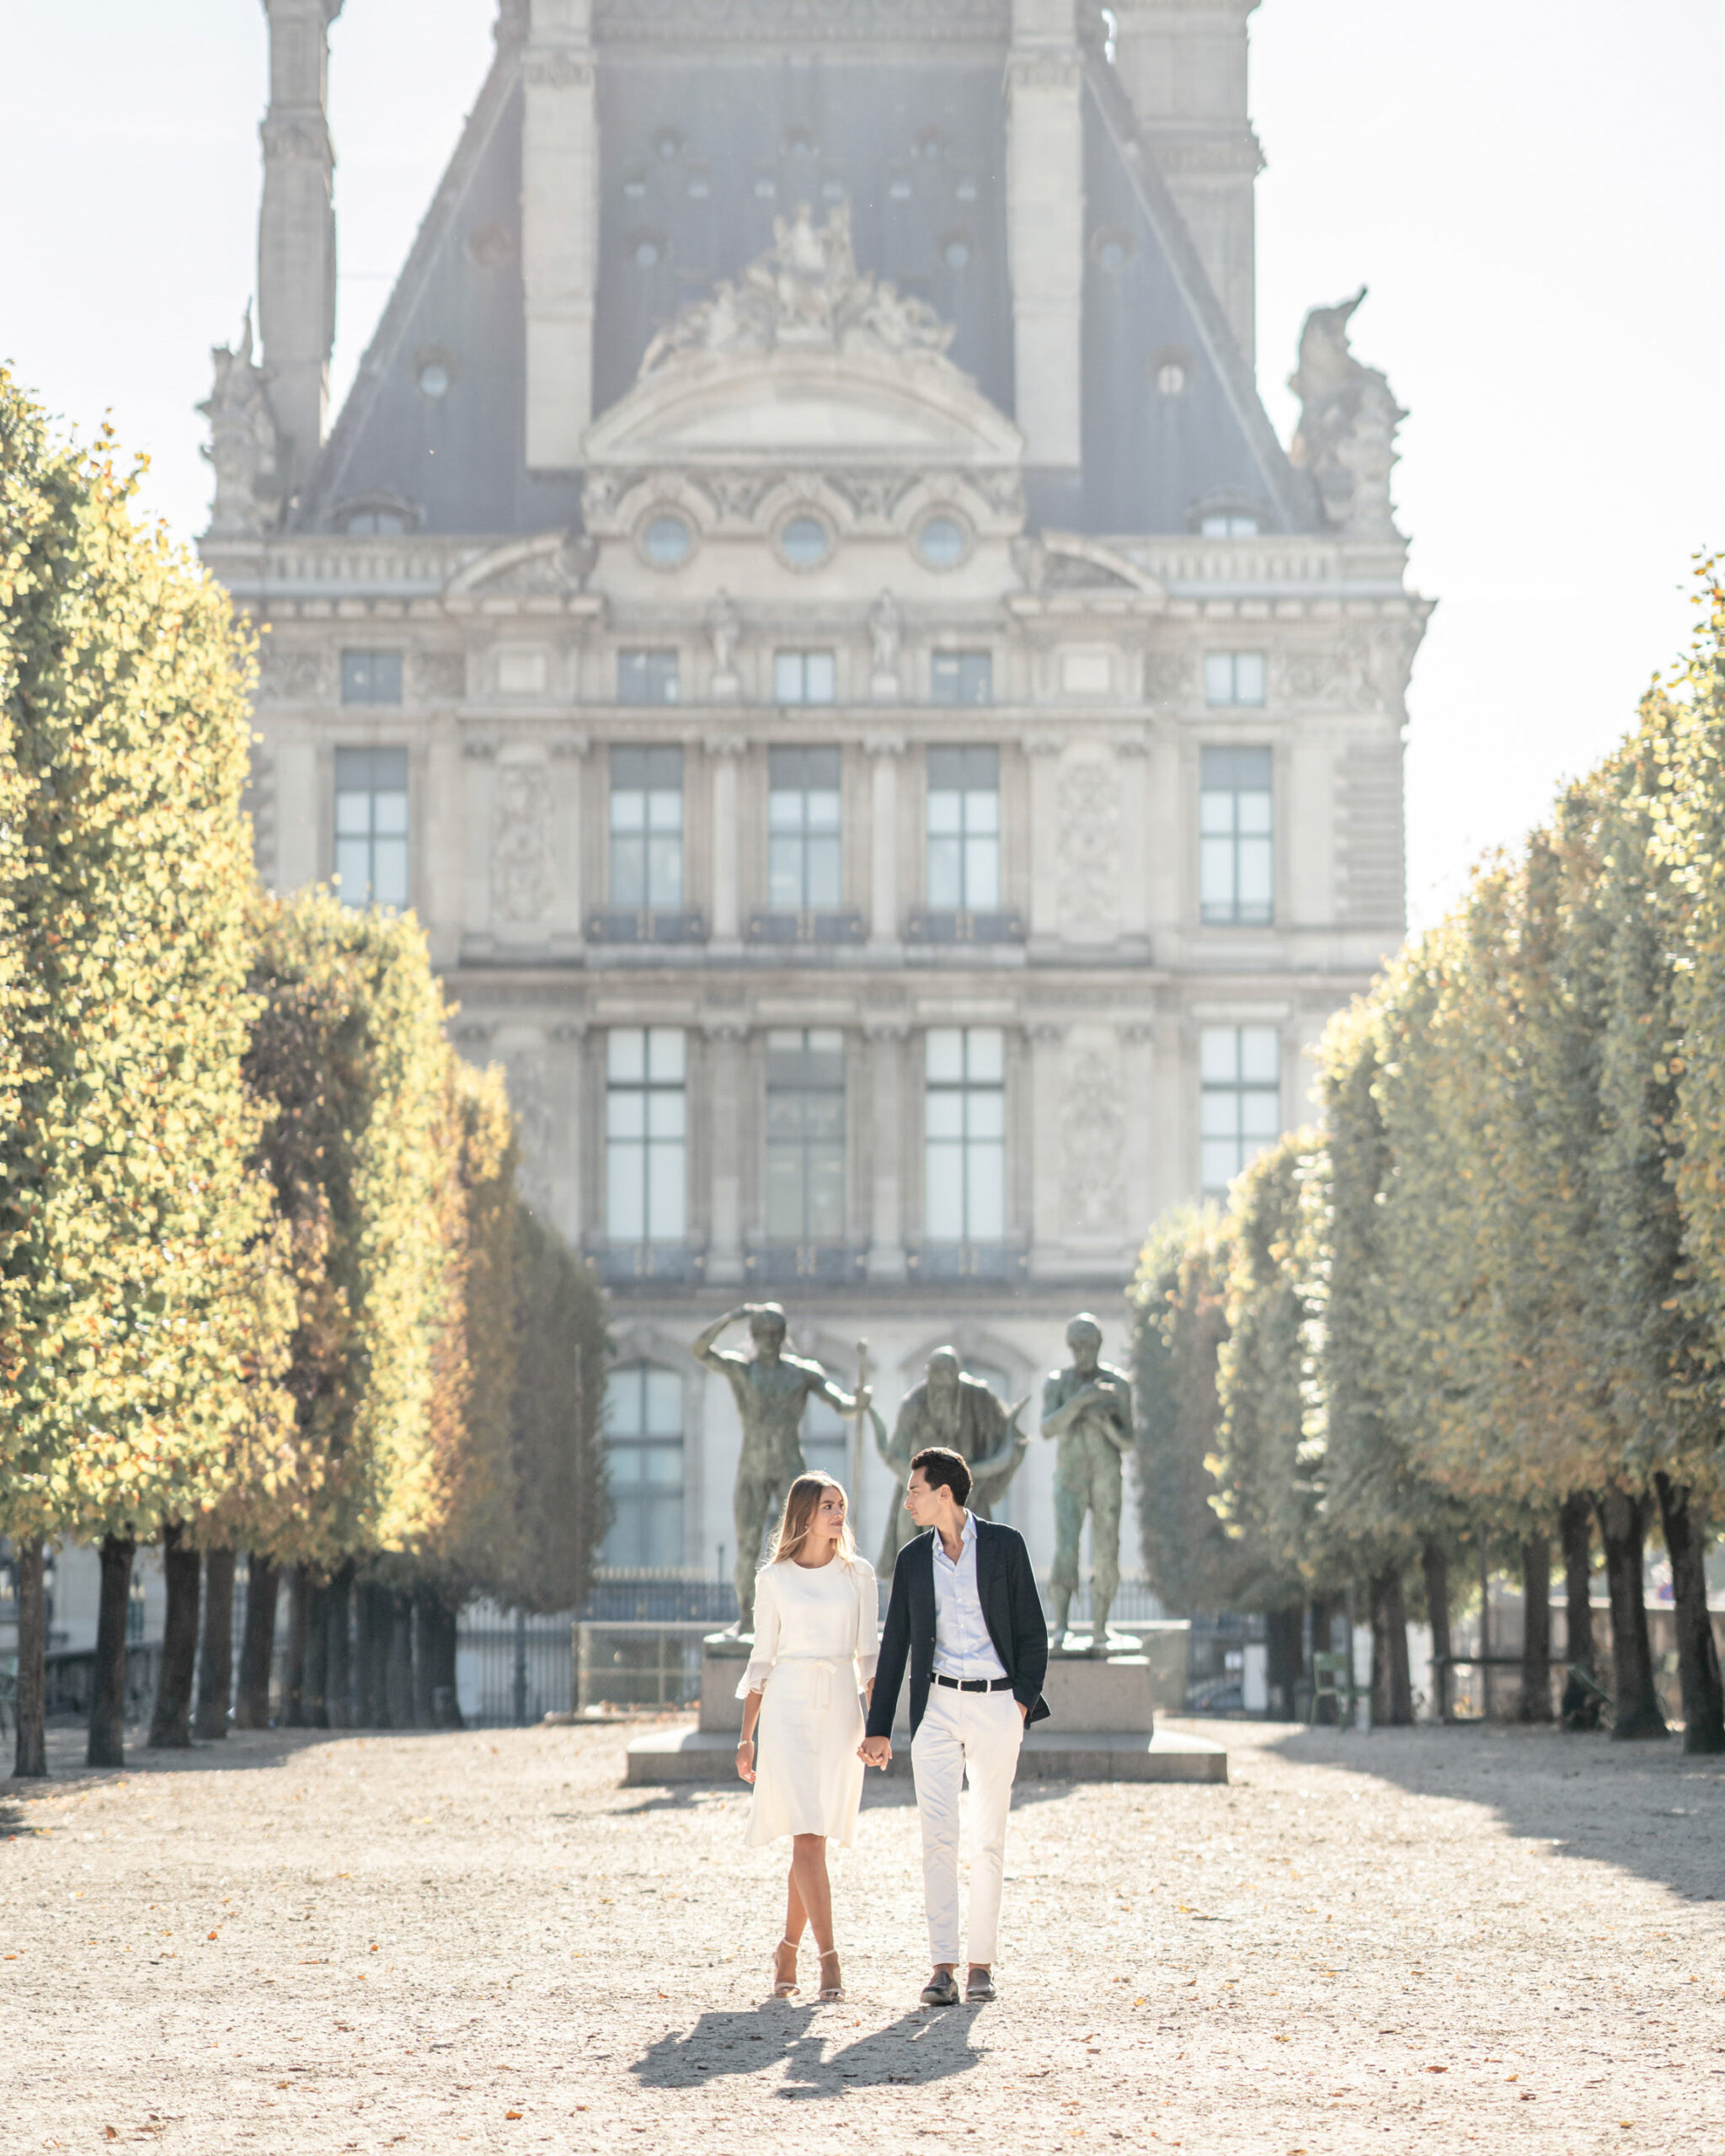 Couple walking down the tree lined path through the park near the Louvre in Paris